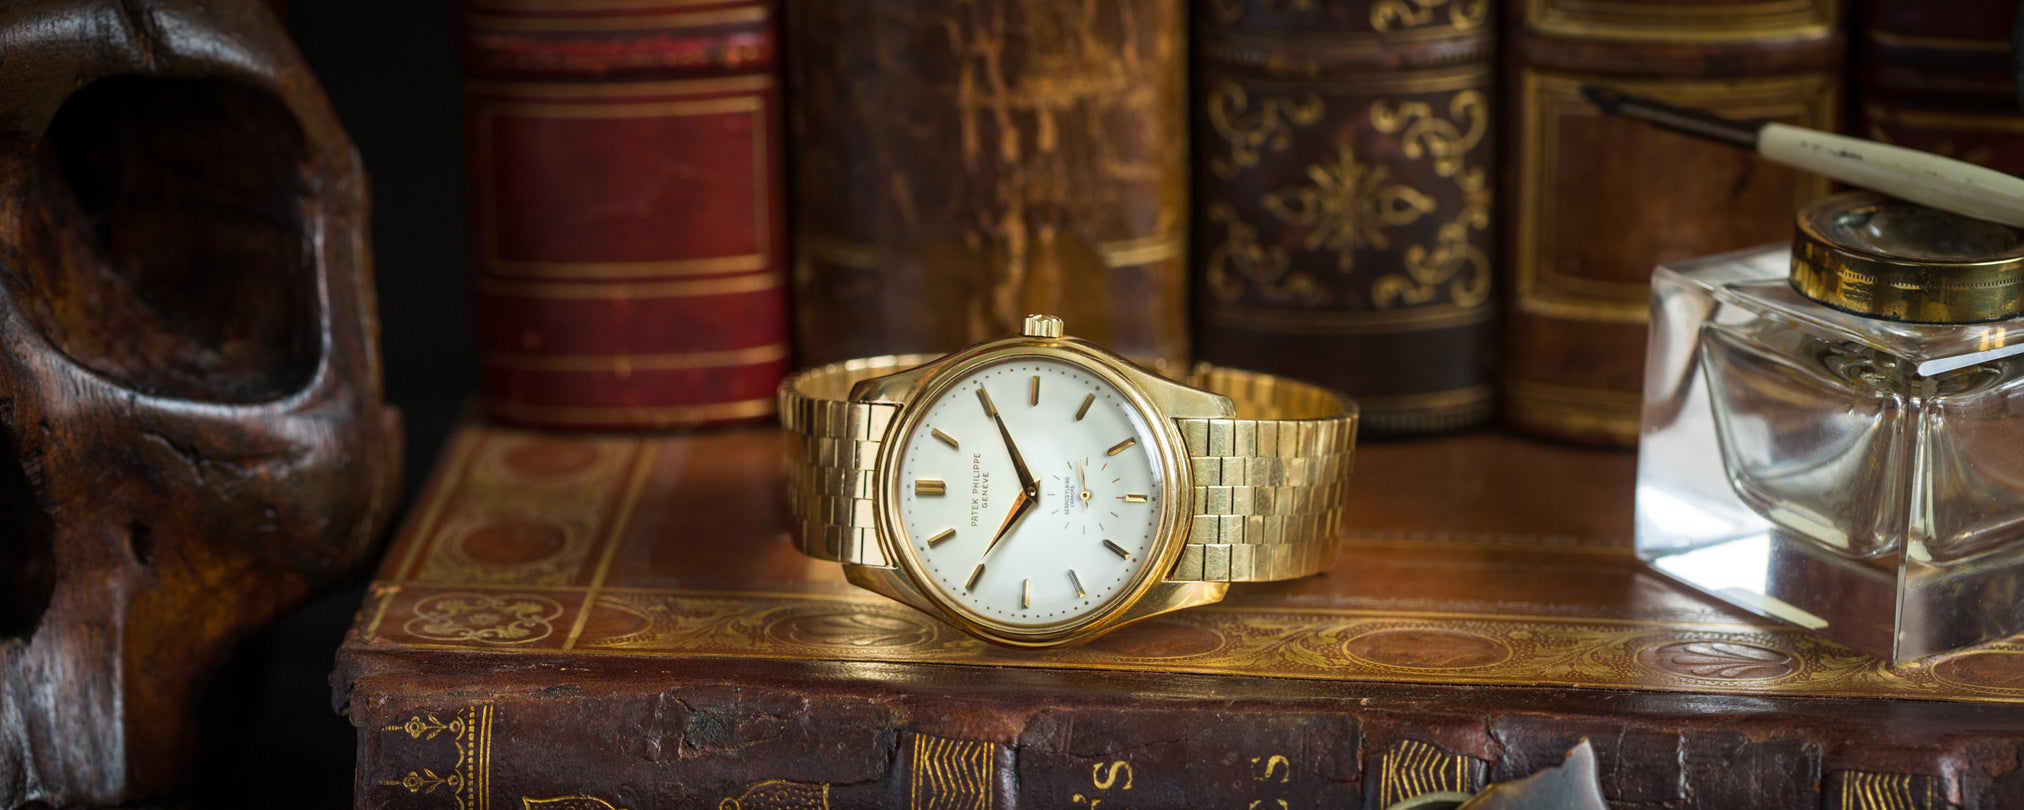 Explore our curated selection of rare horological collectibles and other coveted decorative accents to complement your home and workplace - Twain Time